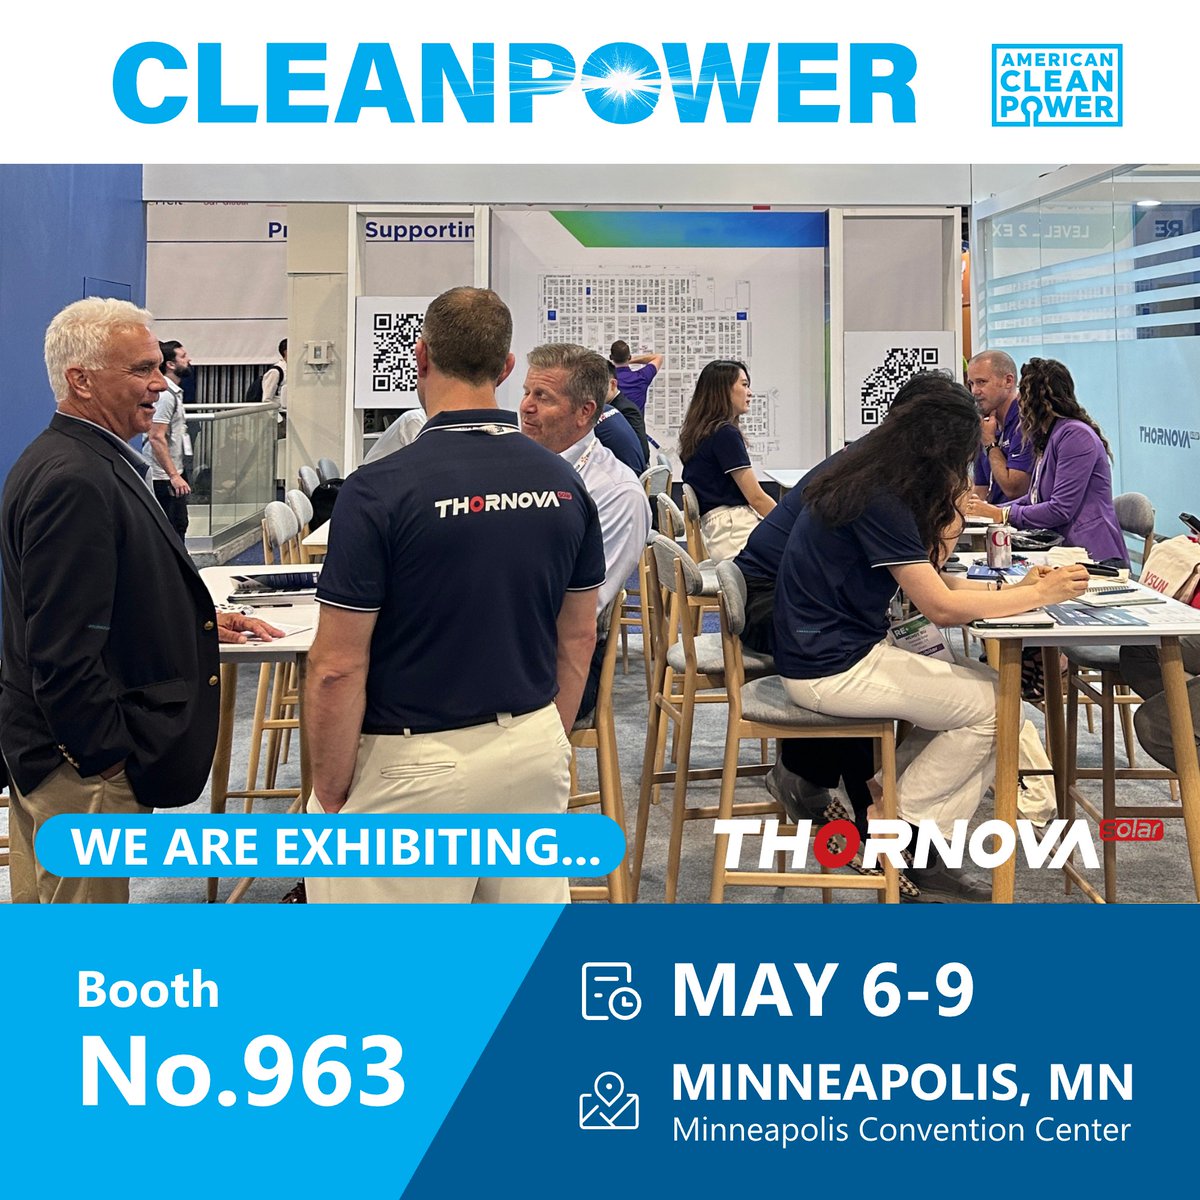 Looking forward to meeting you all at #CLERNPOWER2024 in Minneapolis next week!

Come see us at Booth #963 to learn about Thornova's reliable, high-performance TOPCon and PERC modules, and grab some exclusive swag. 

#CLERNPOWER2024 #SolarSolutions 
#SolarModules #SolarTechnology